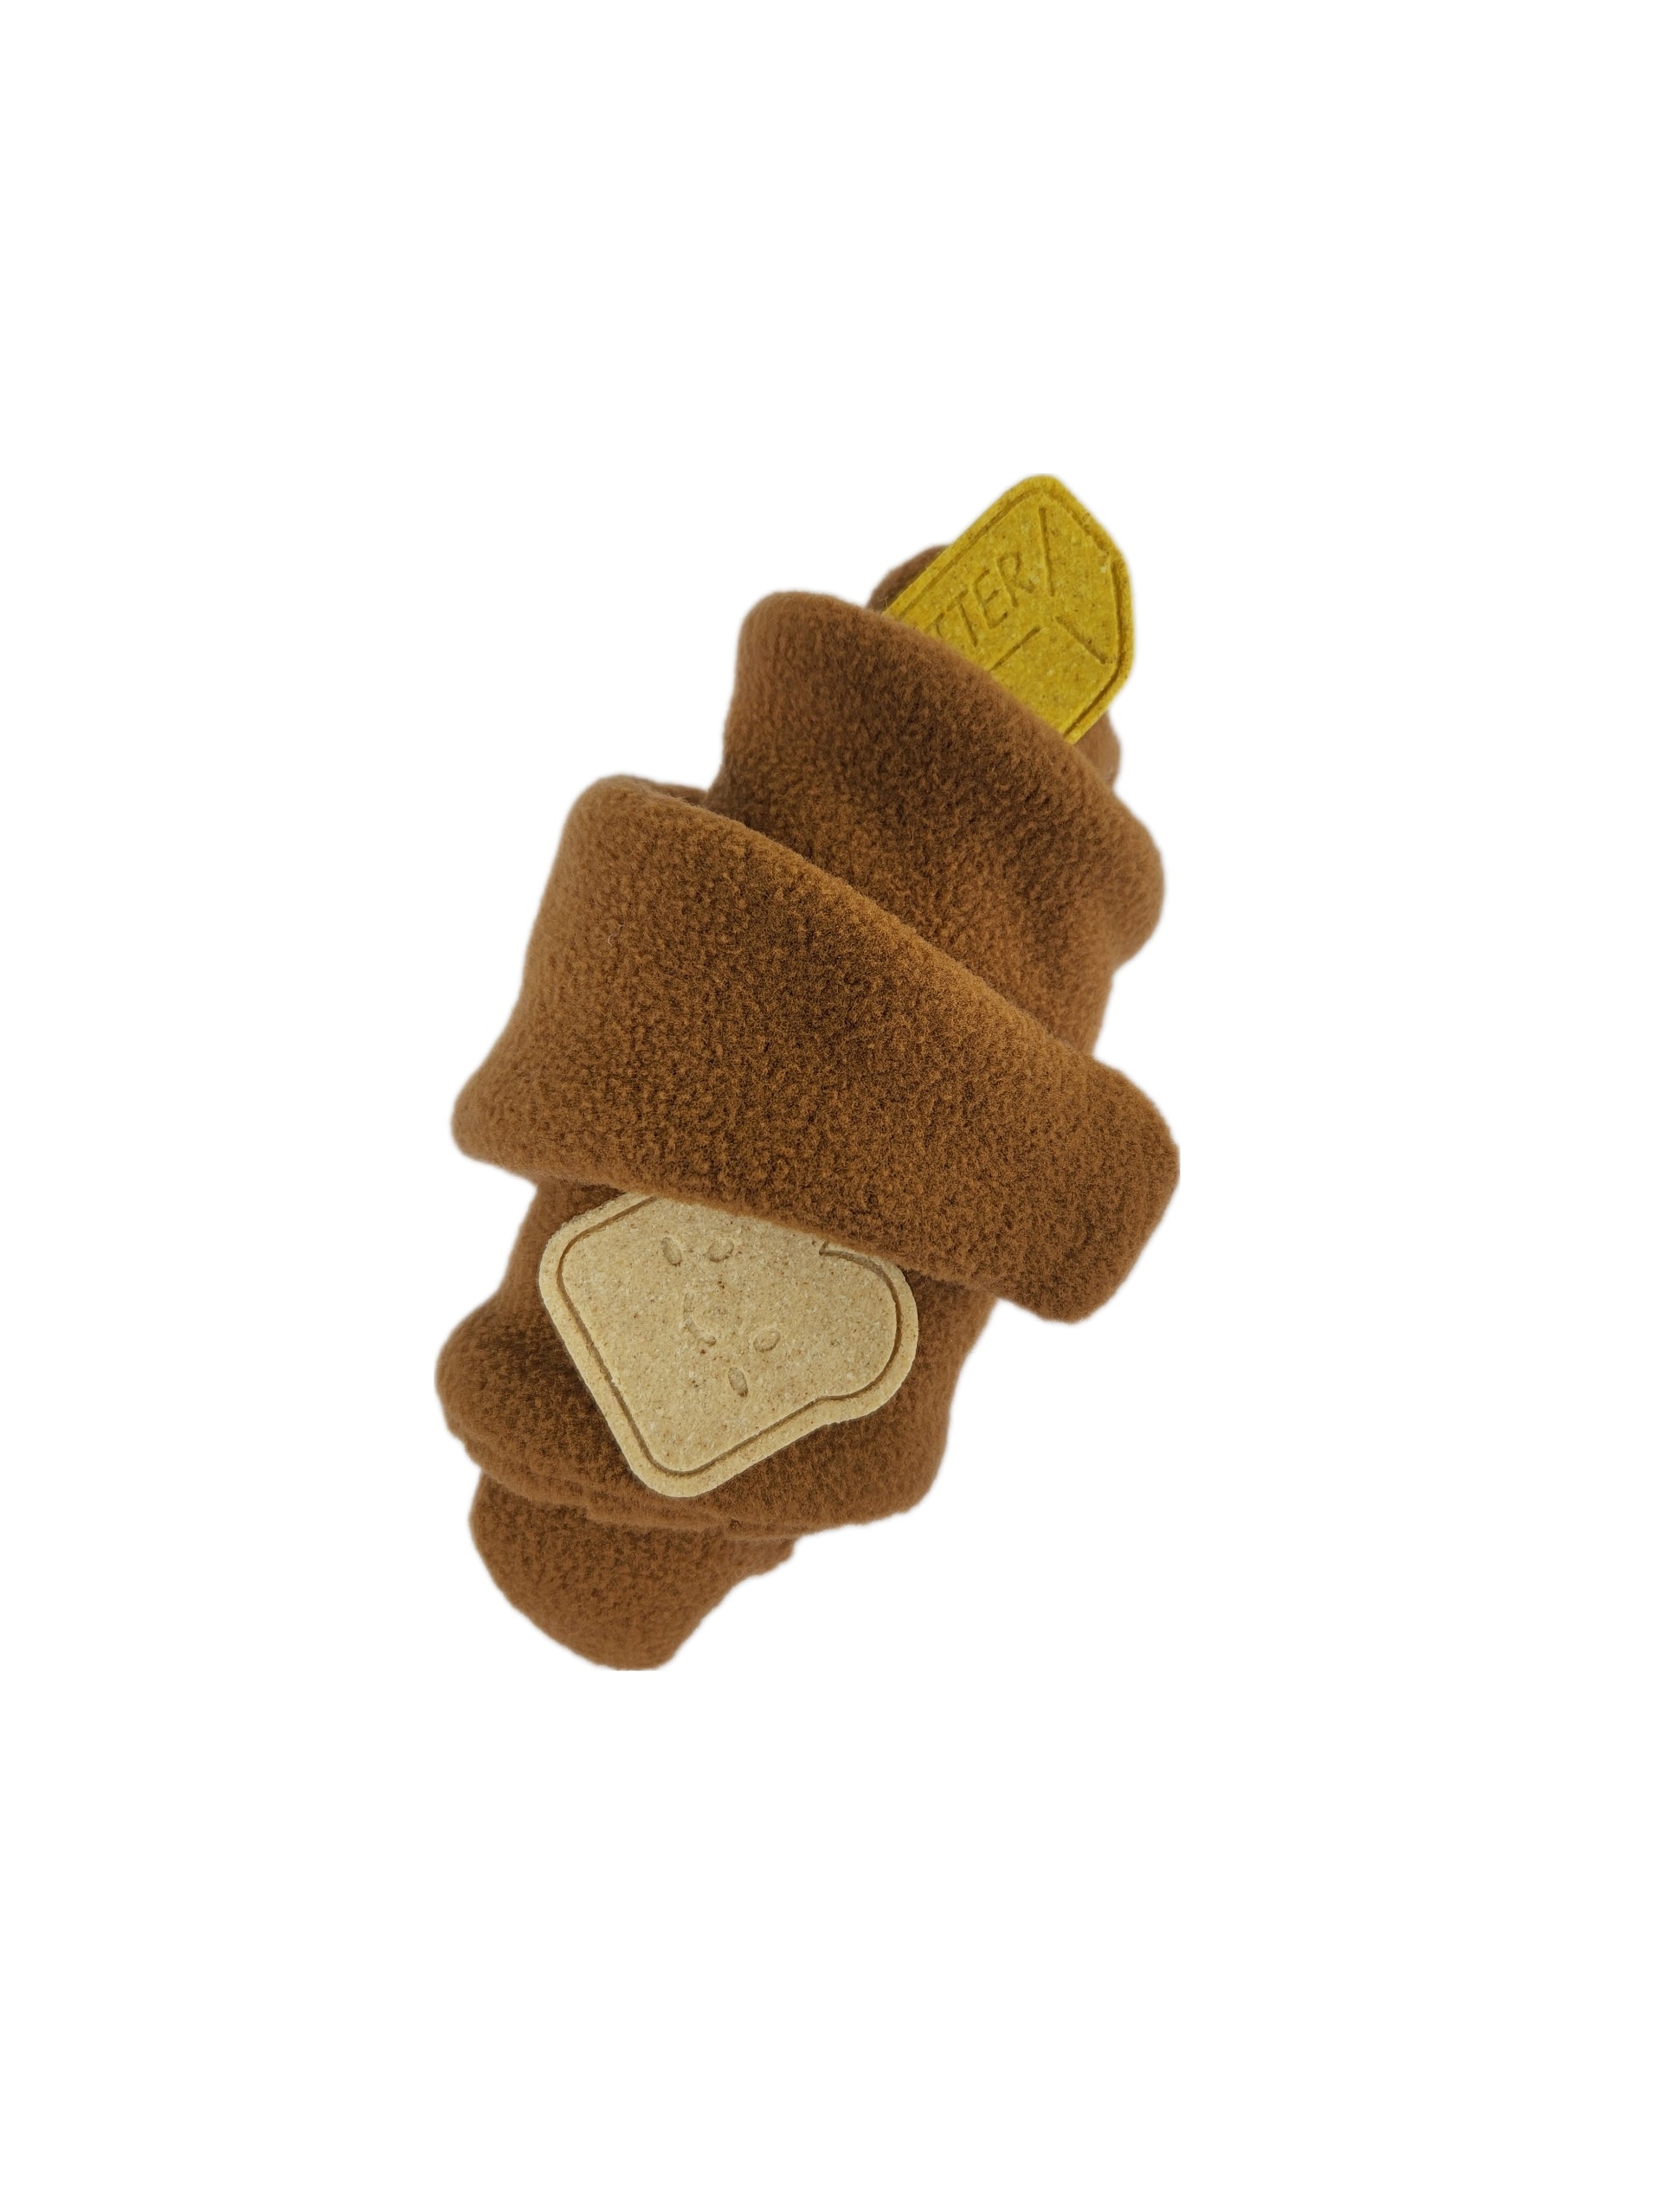 Snuffle croissant - Enrichment snuffle toy